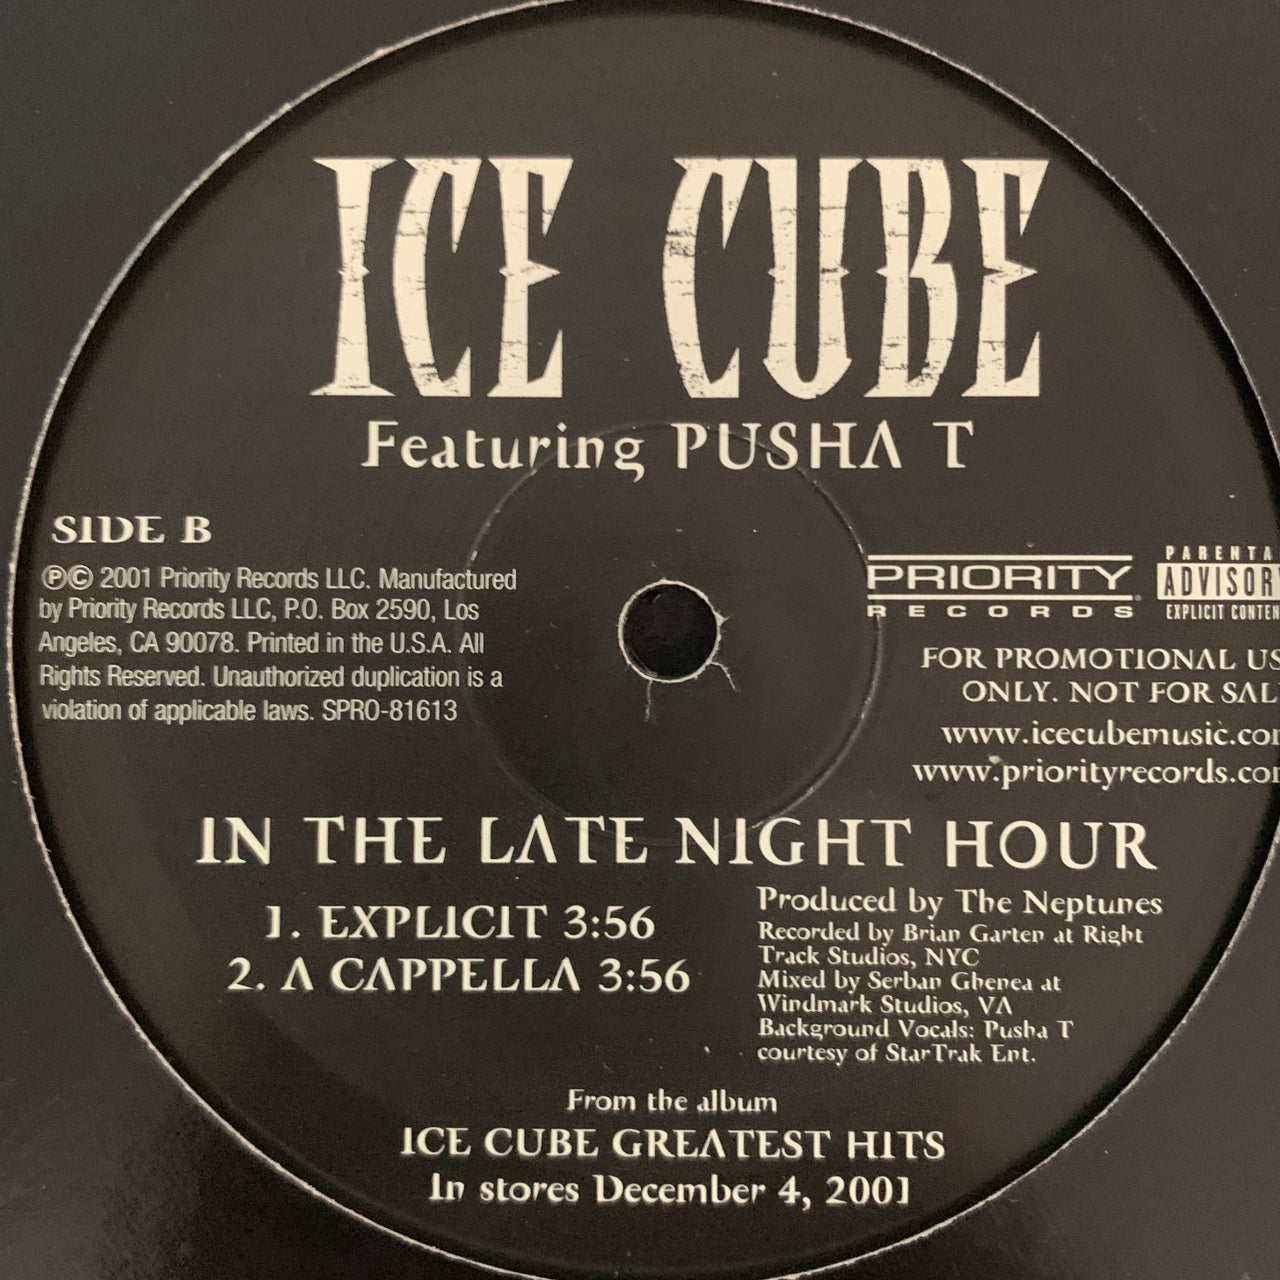 Ice Cube Feat Pusha T “In The Late Night Hour” 4 Version 12inch Vinyl